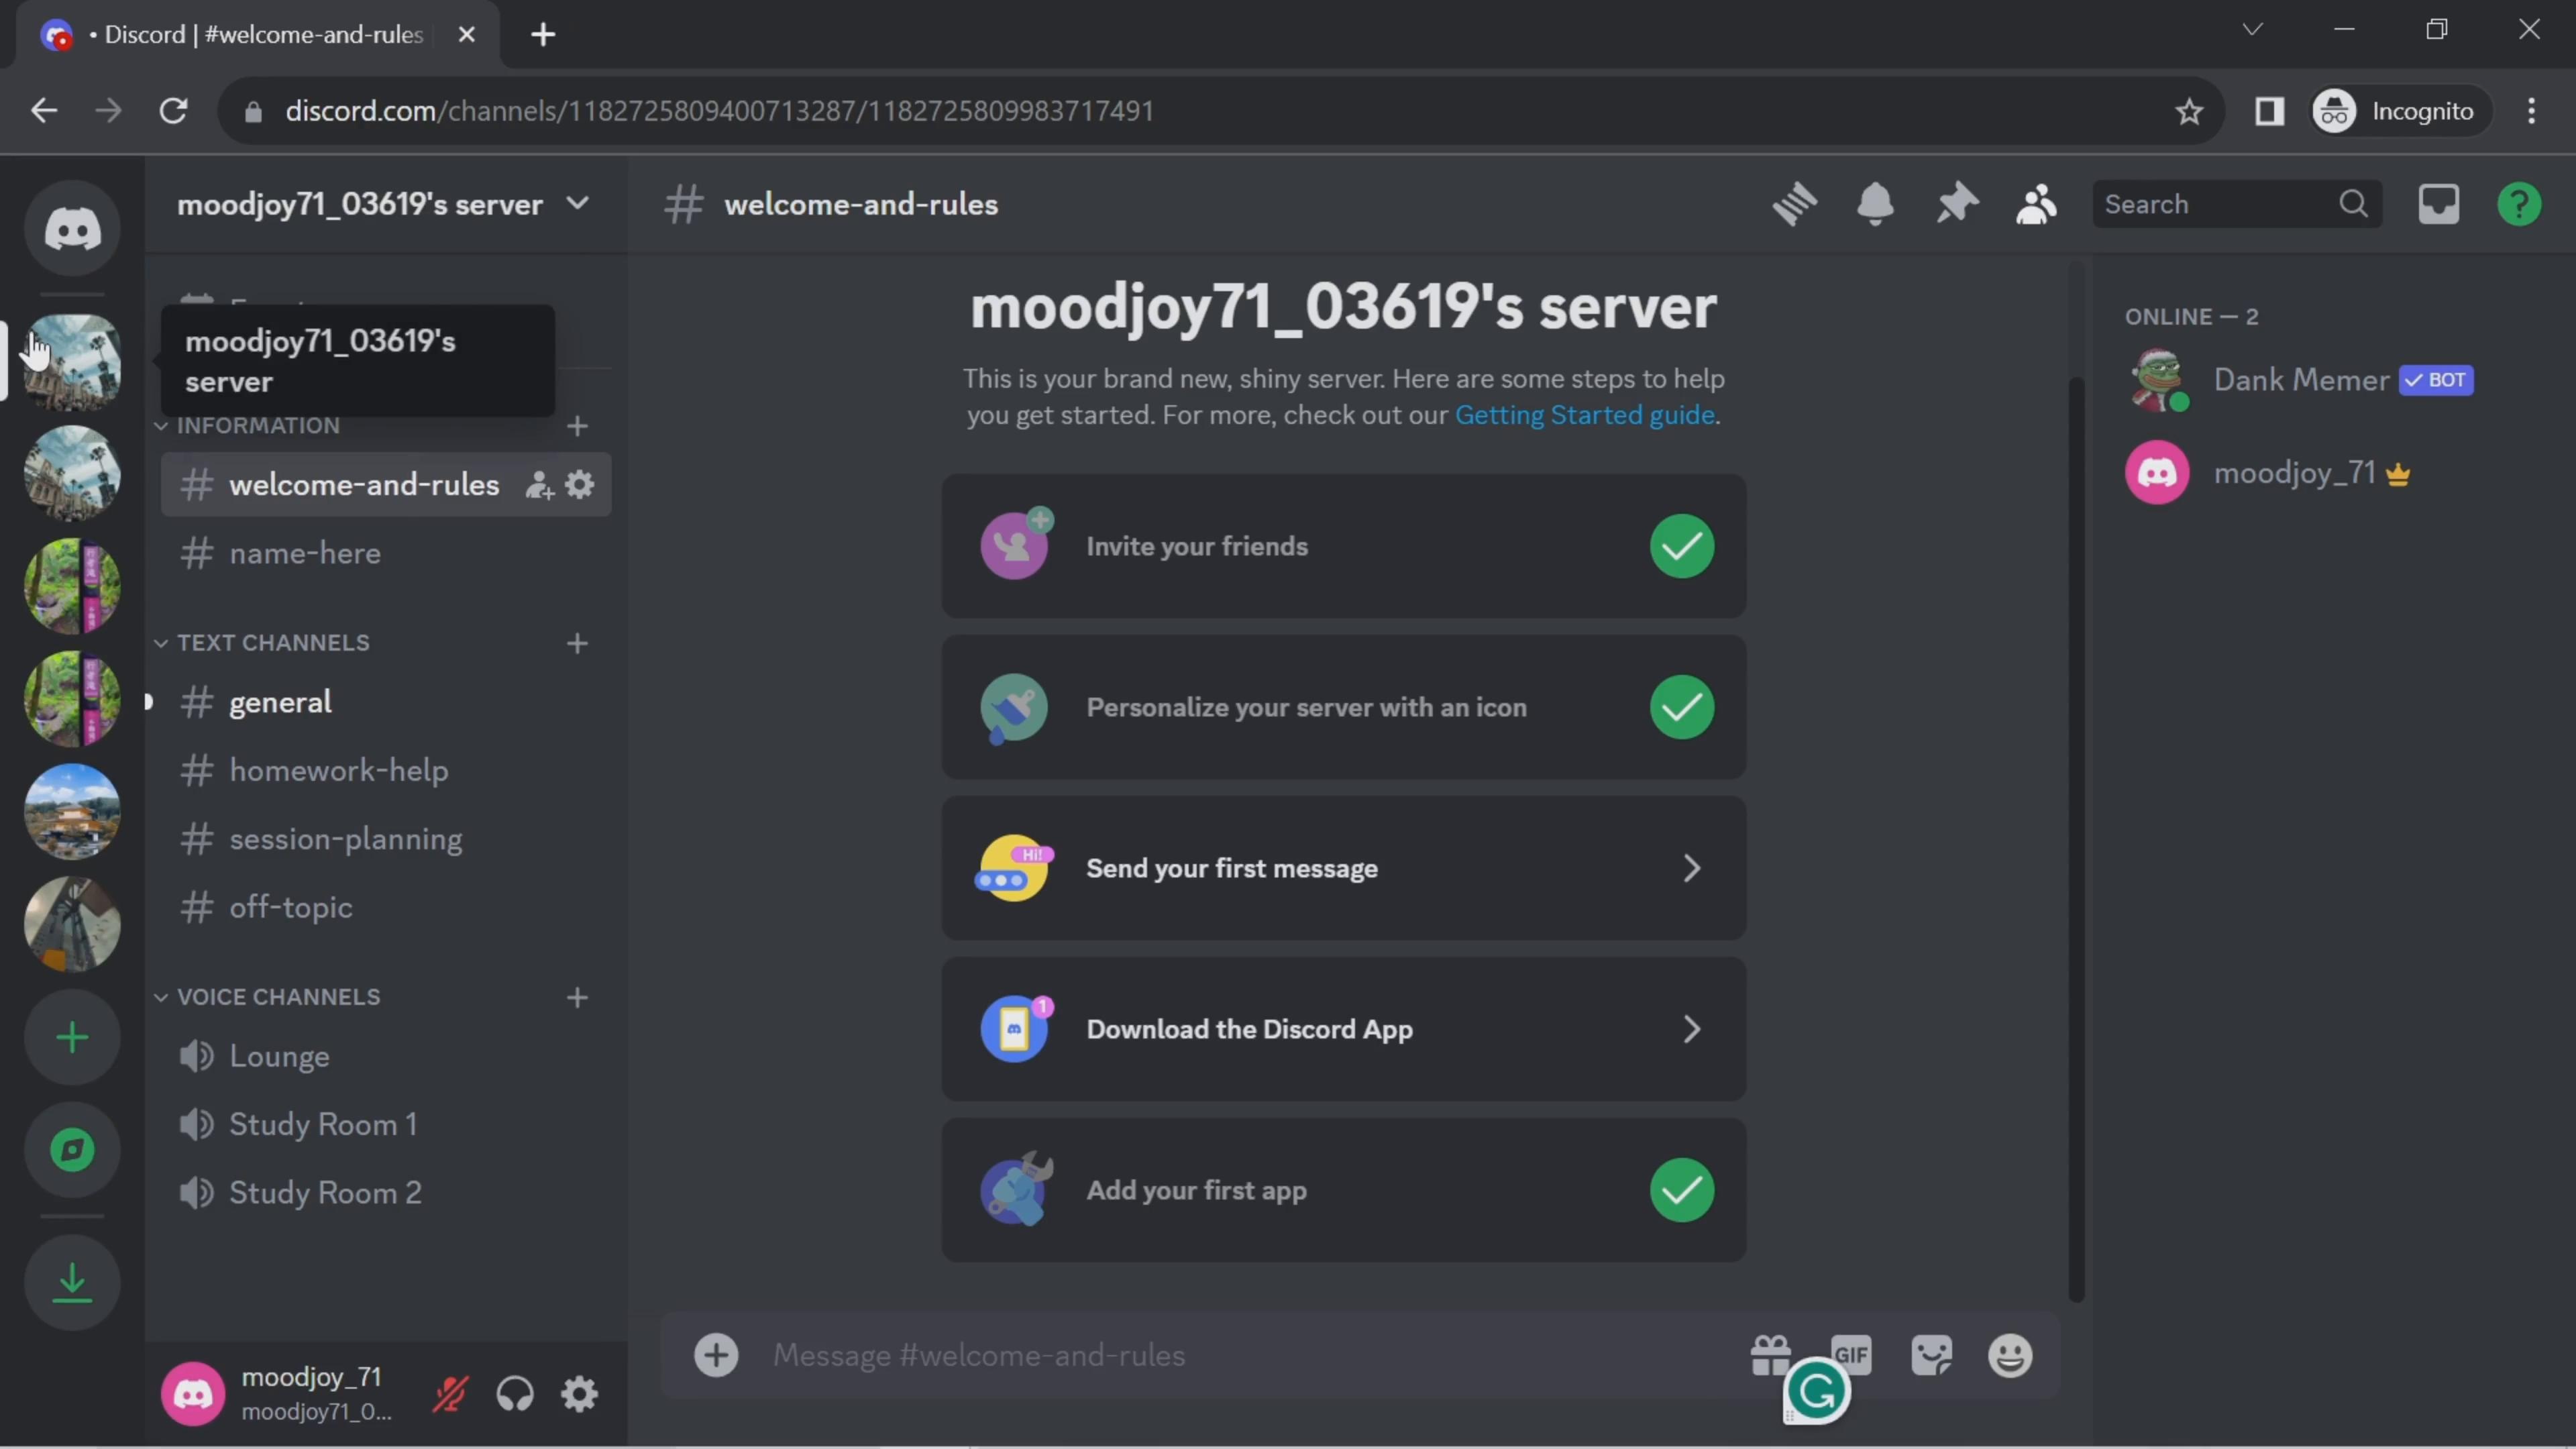 Adding apps to server on Discord video screenshot